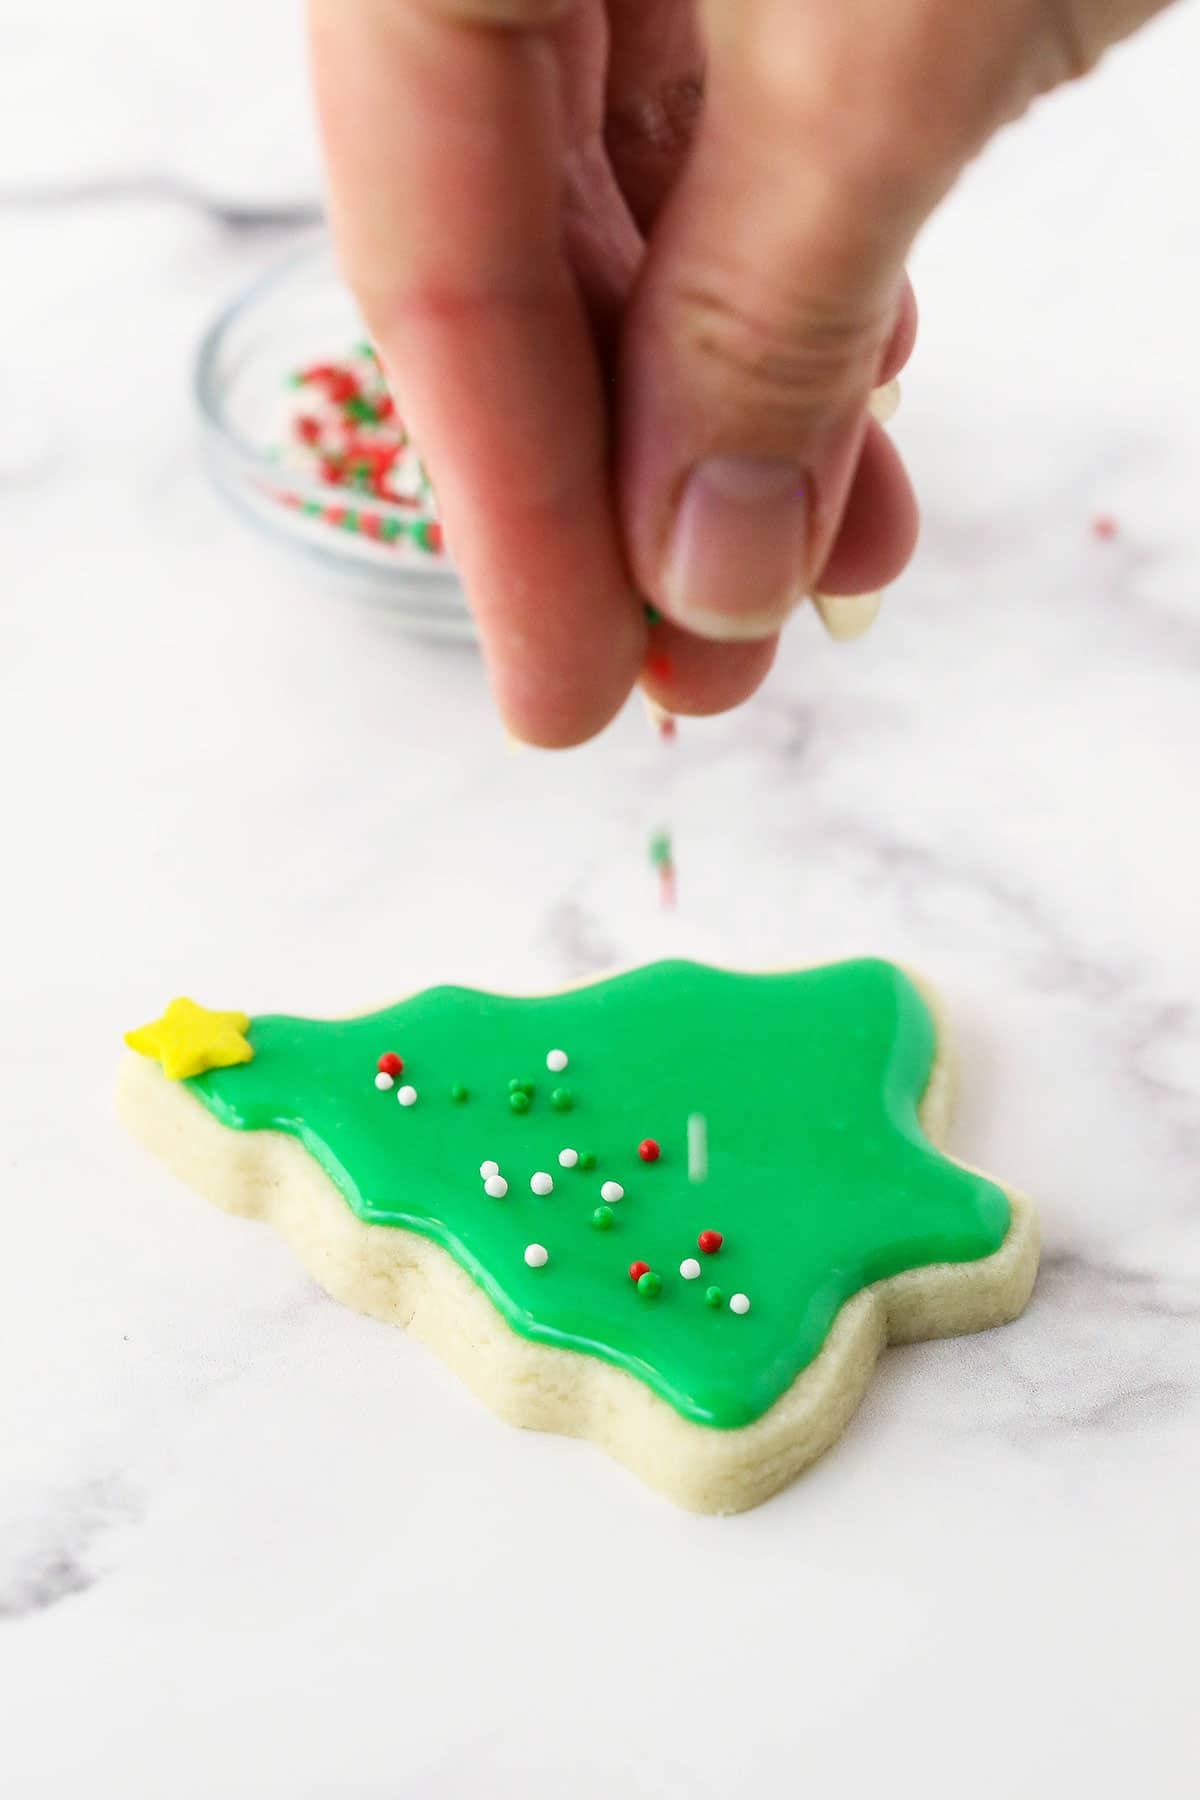 Little round sprinkles being dropped onto a sugar cookie decorated like a Christmas tree